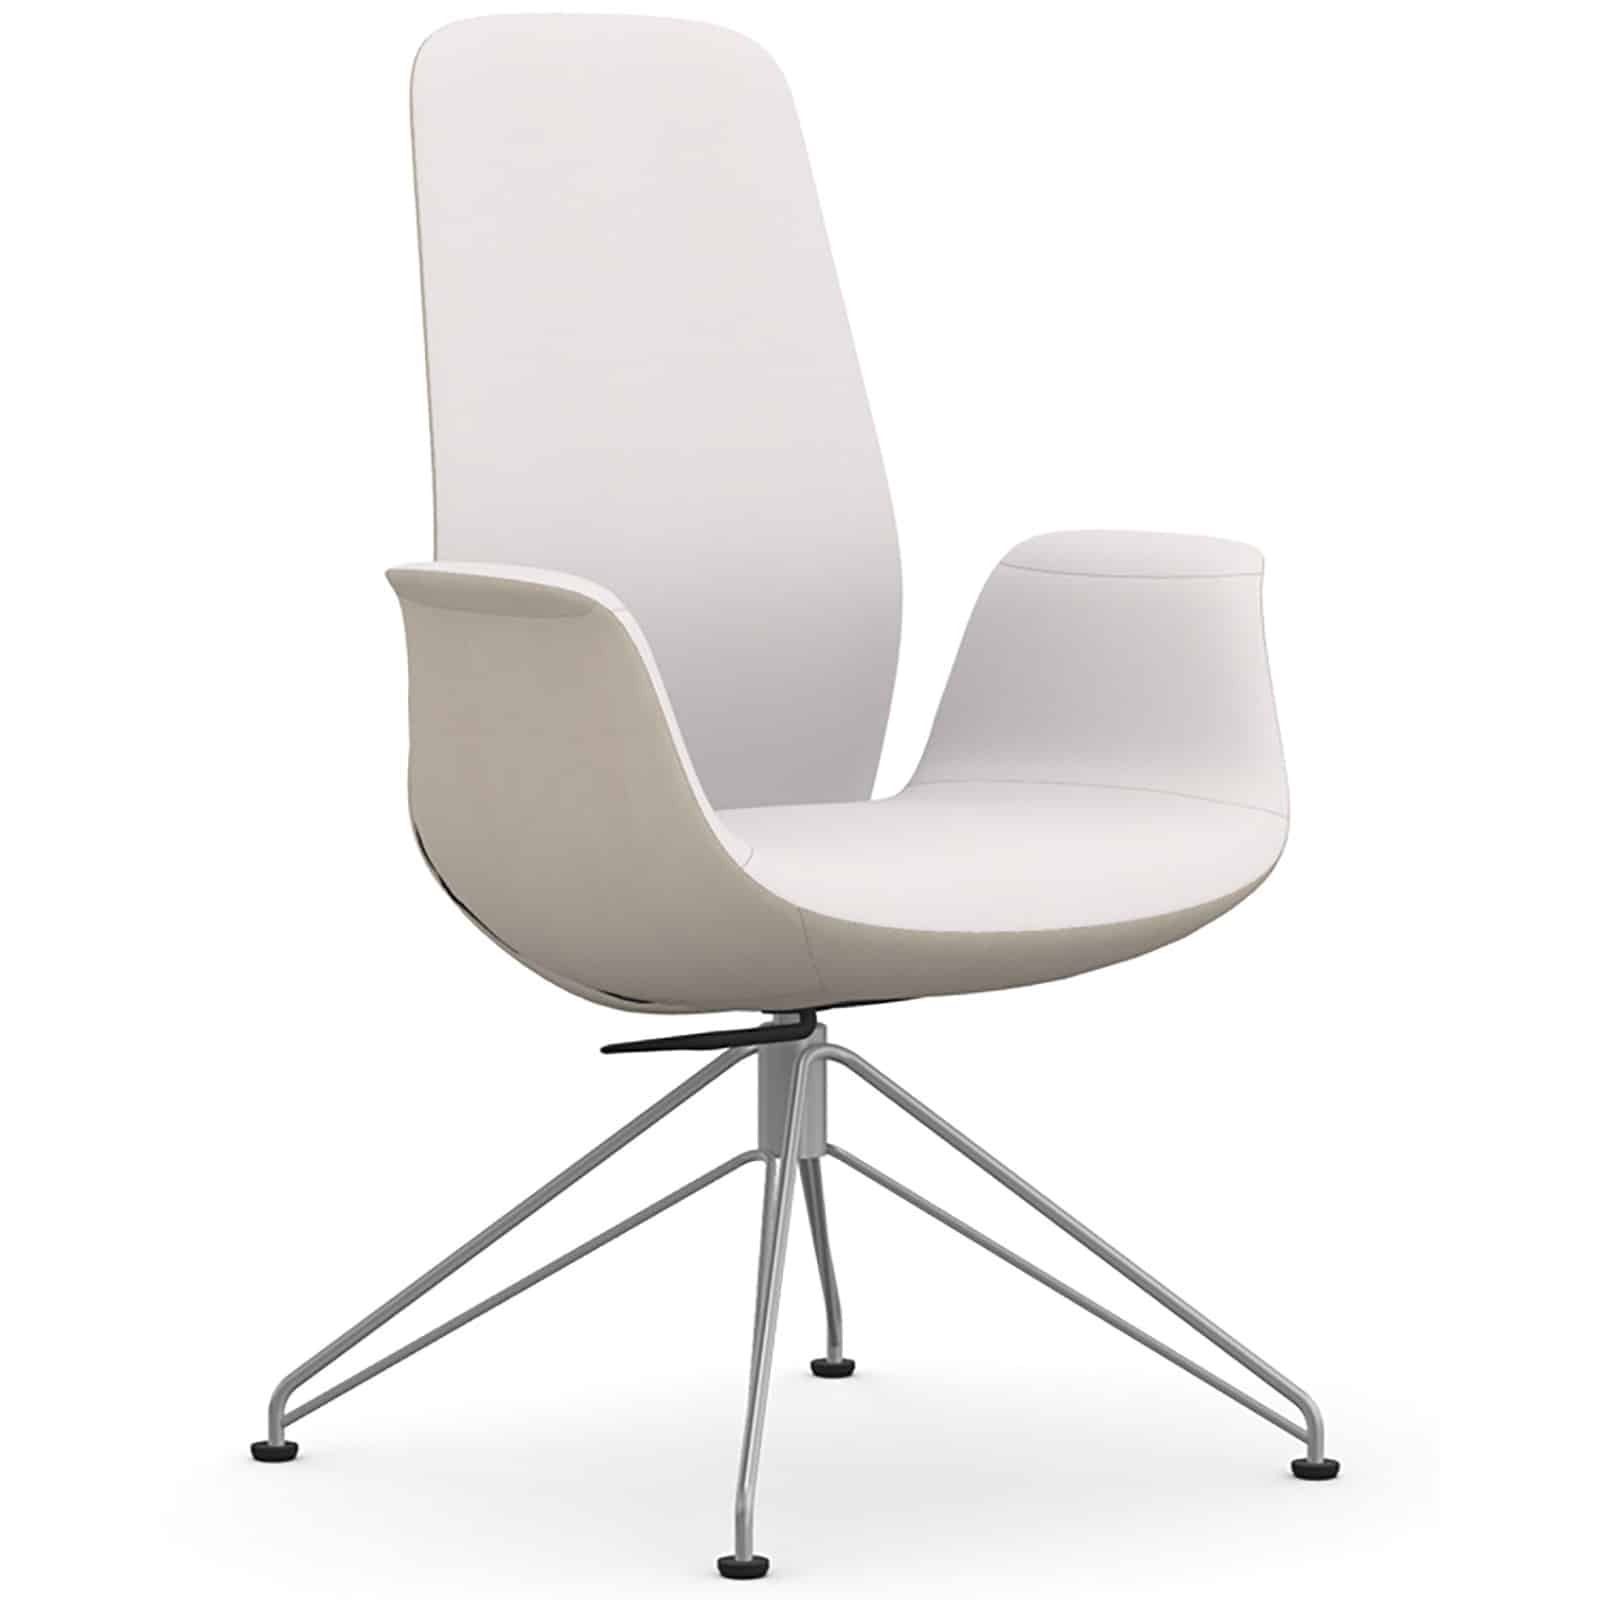 9 to 5 Seating's Ellie chair is comfortable and elegant.